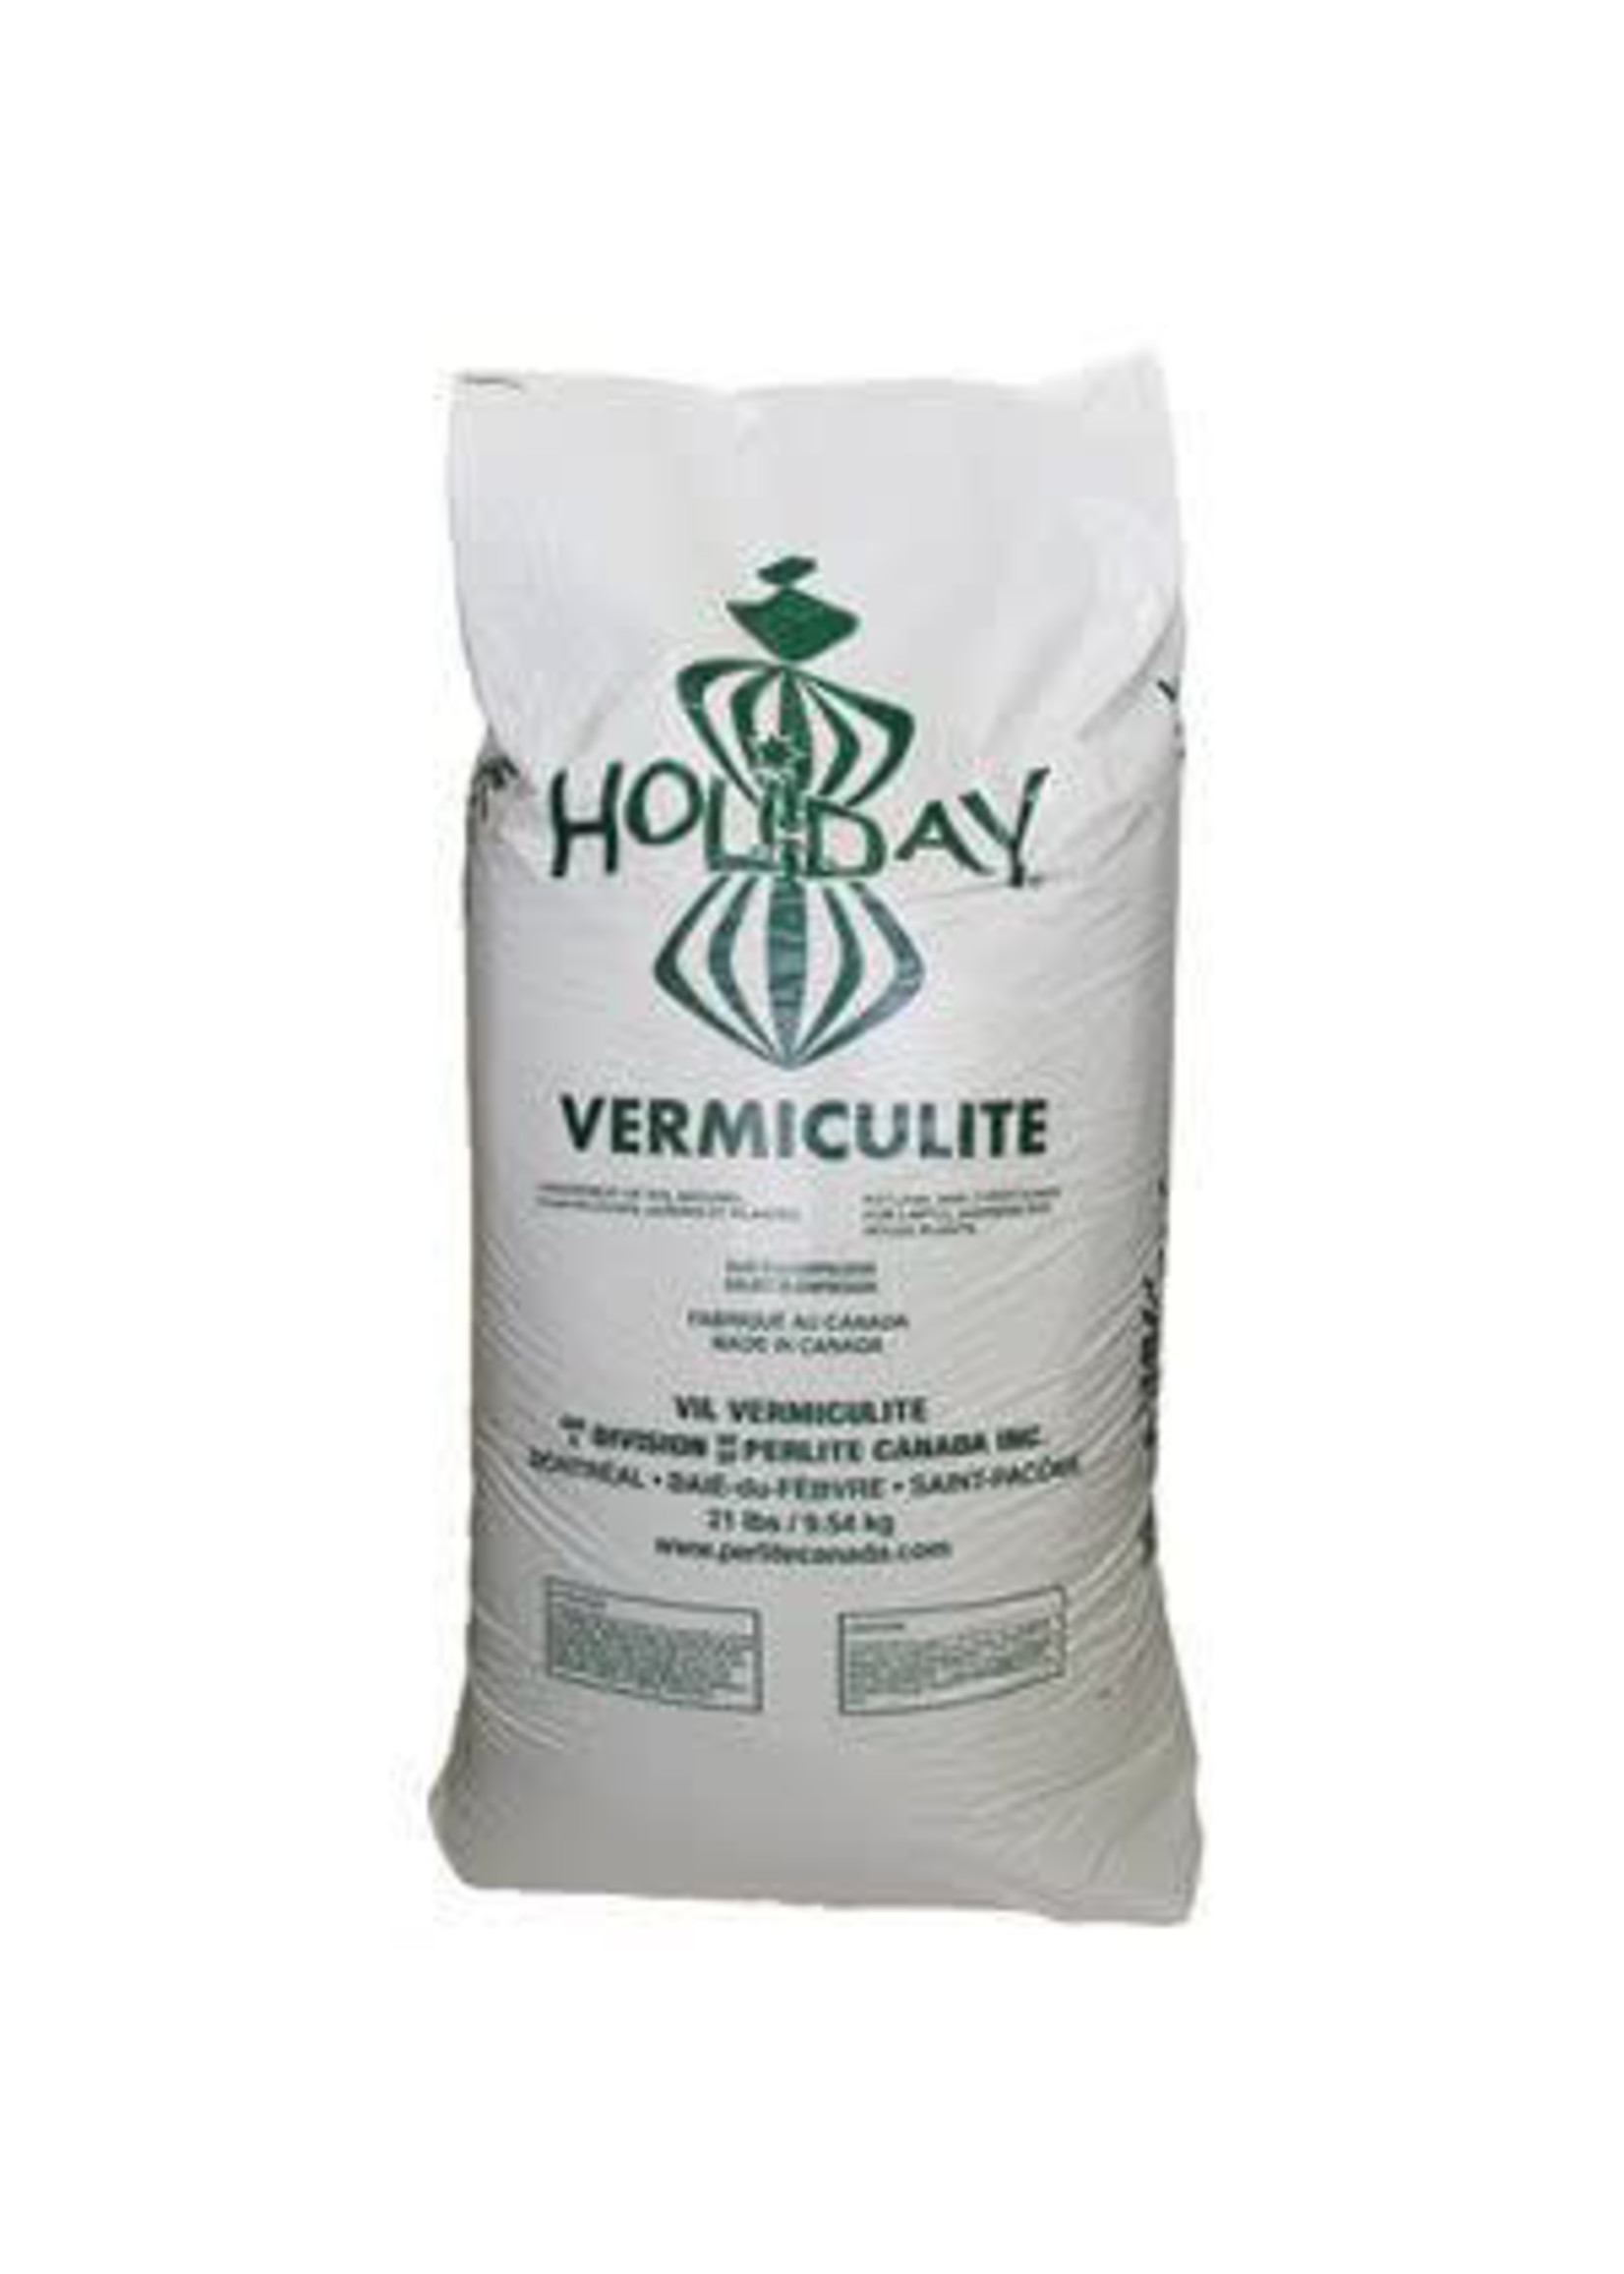 HOLIDAY VERMICULITE 112L